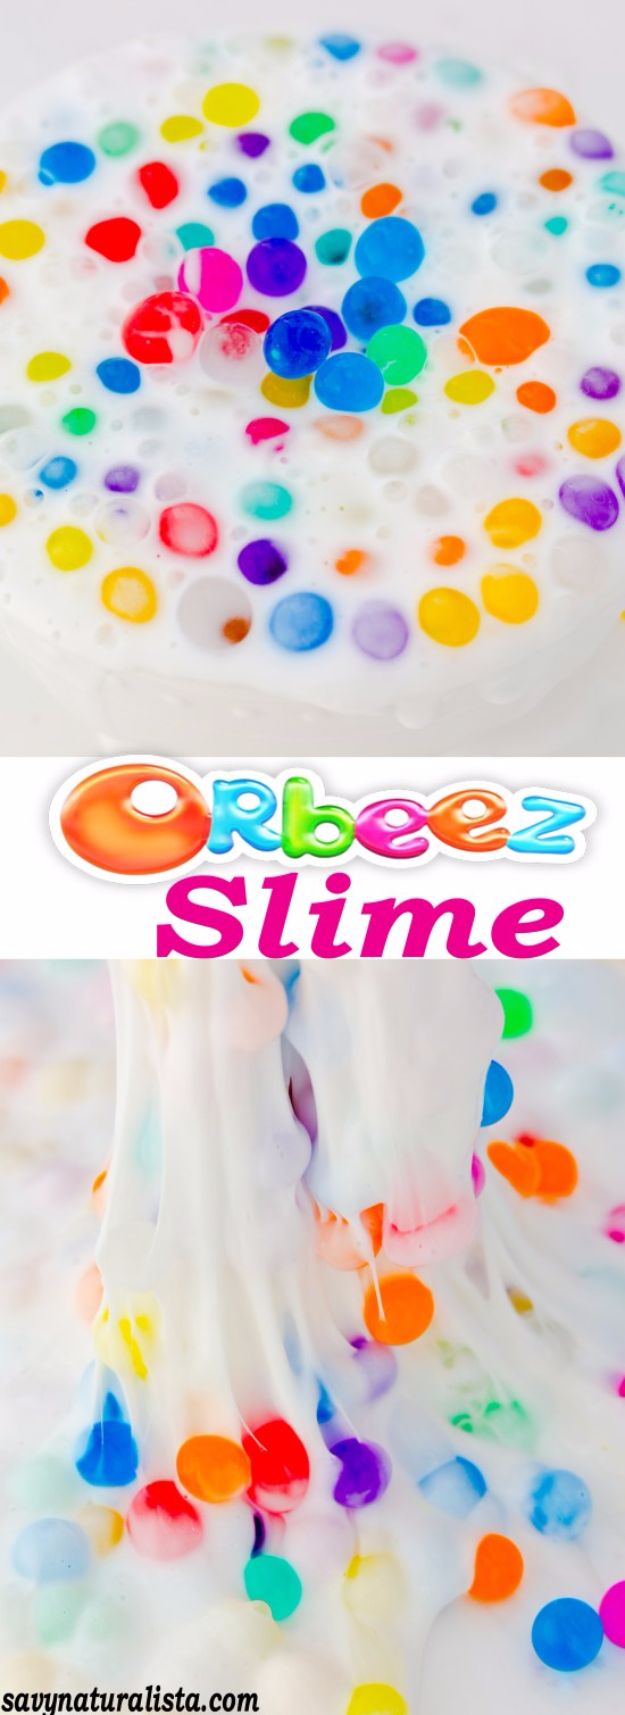 Borax Free Slime Recipes - Toothpaste Orbeez Slime - Safe Slimes To Make Without Glue - How To Make Fluffy Slime With Shaving Cream - Easy 3 Ingredients Glitter Slime, Clear, Galaxy, Best DIY Slime Tutorials With Step by Step Instructions #slimerecipes #slime #kidscrafts #teencrafts